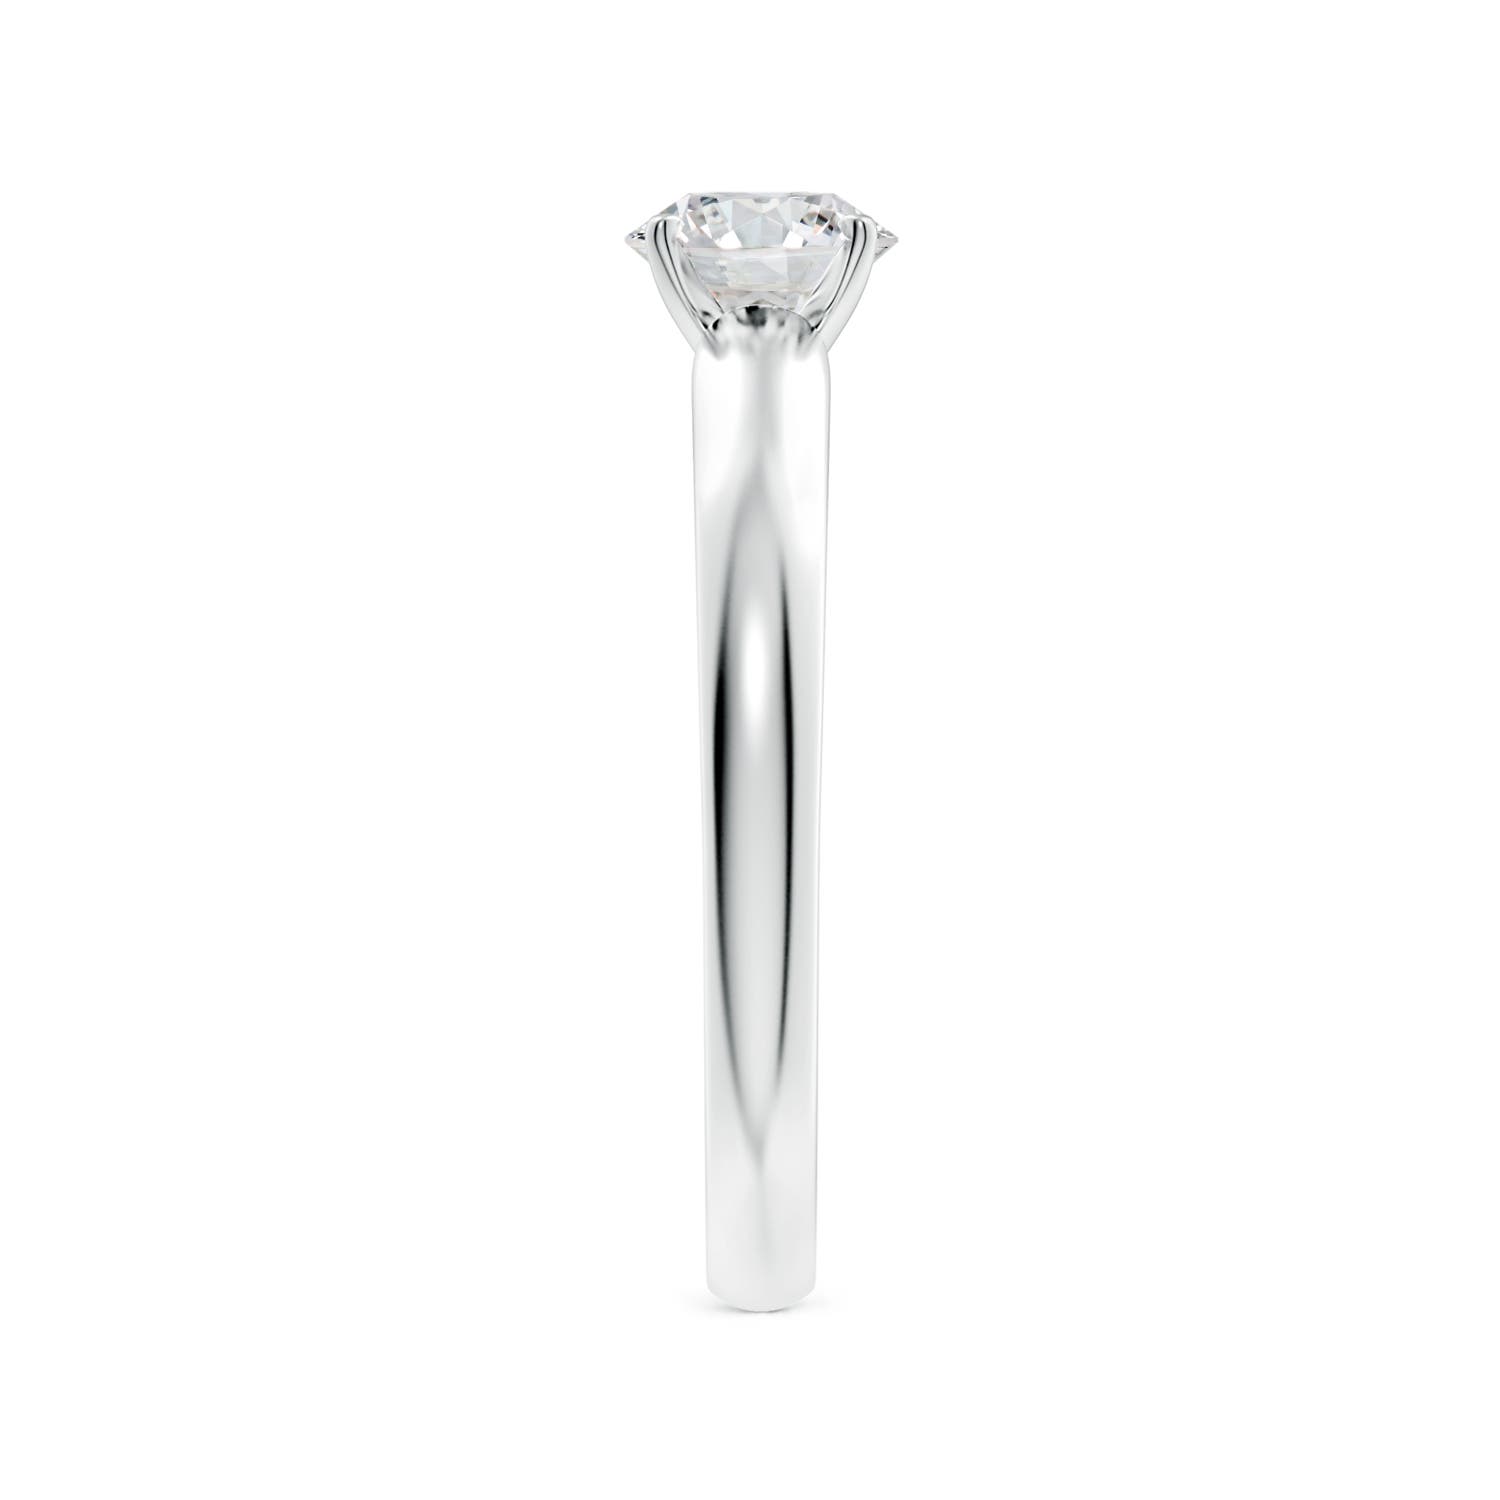 H, SI2 / 0.75 CT / 14 KT White Gold